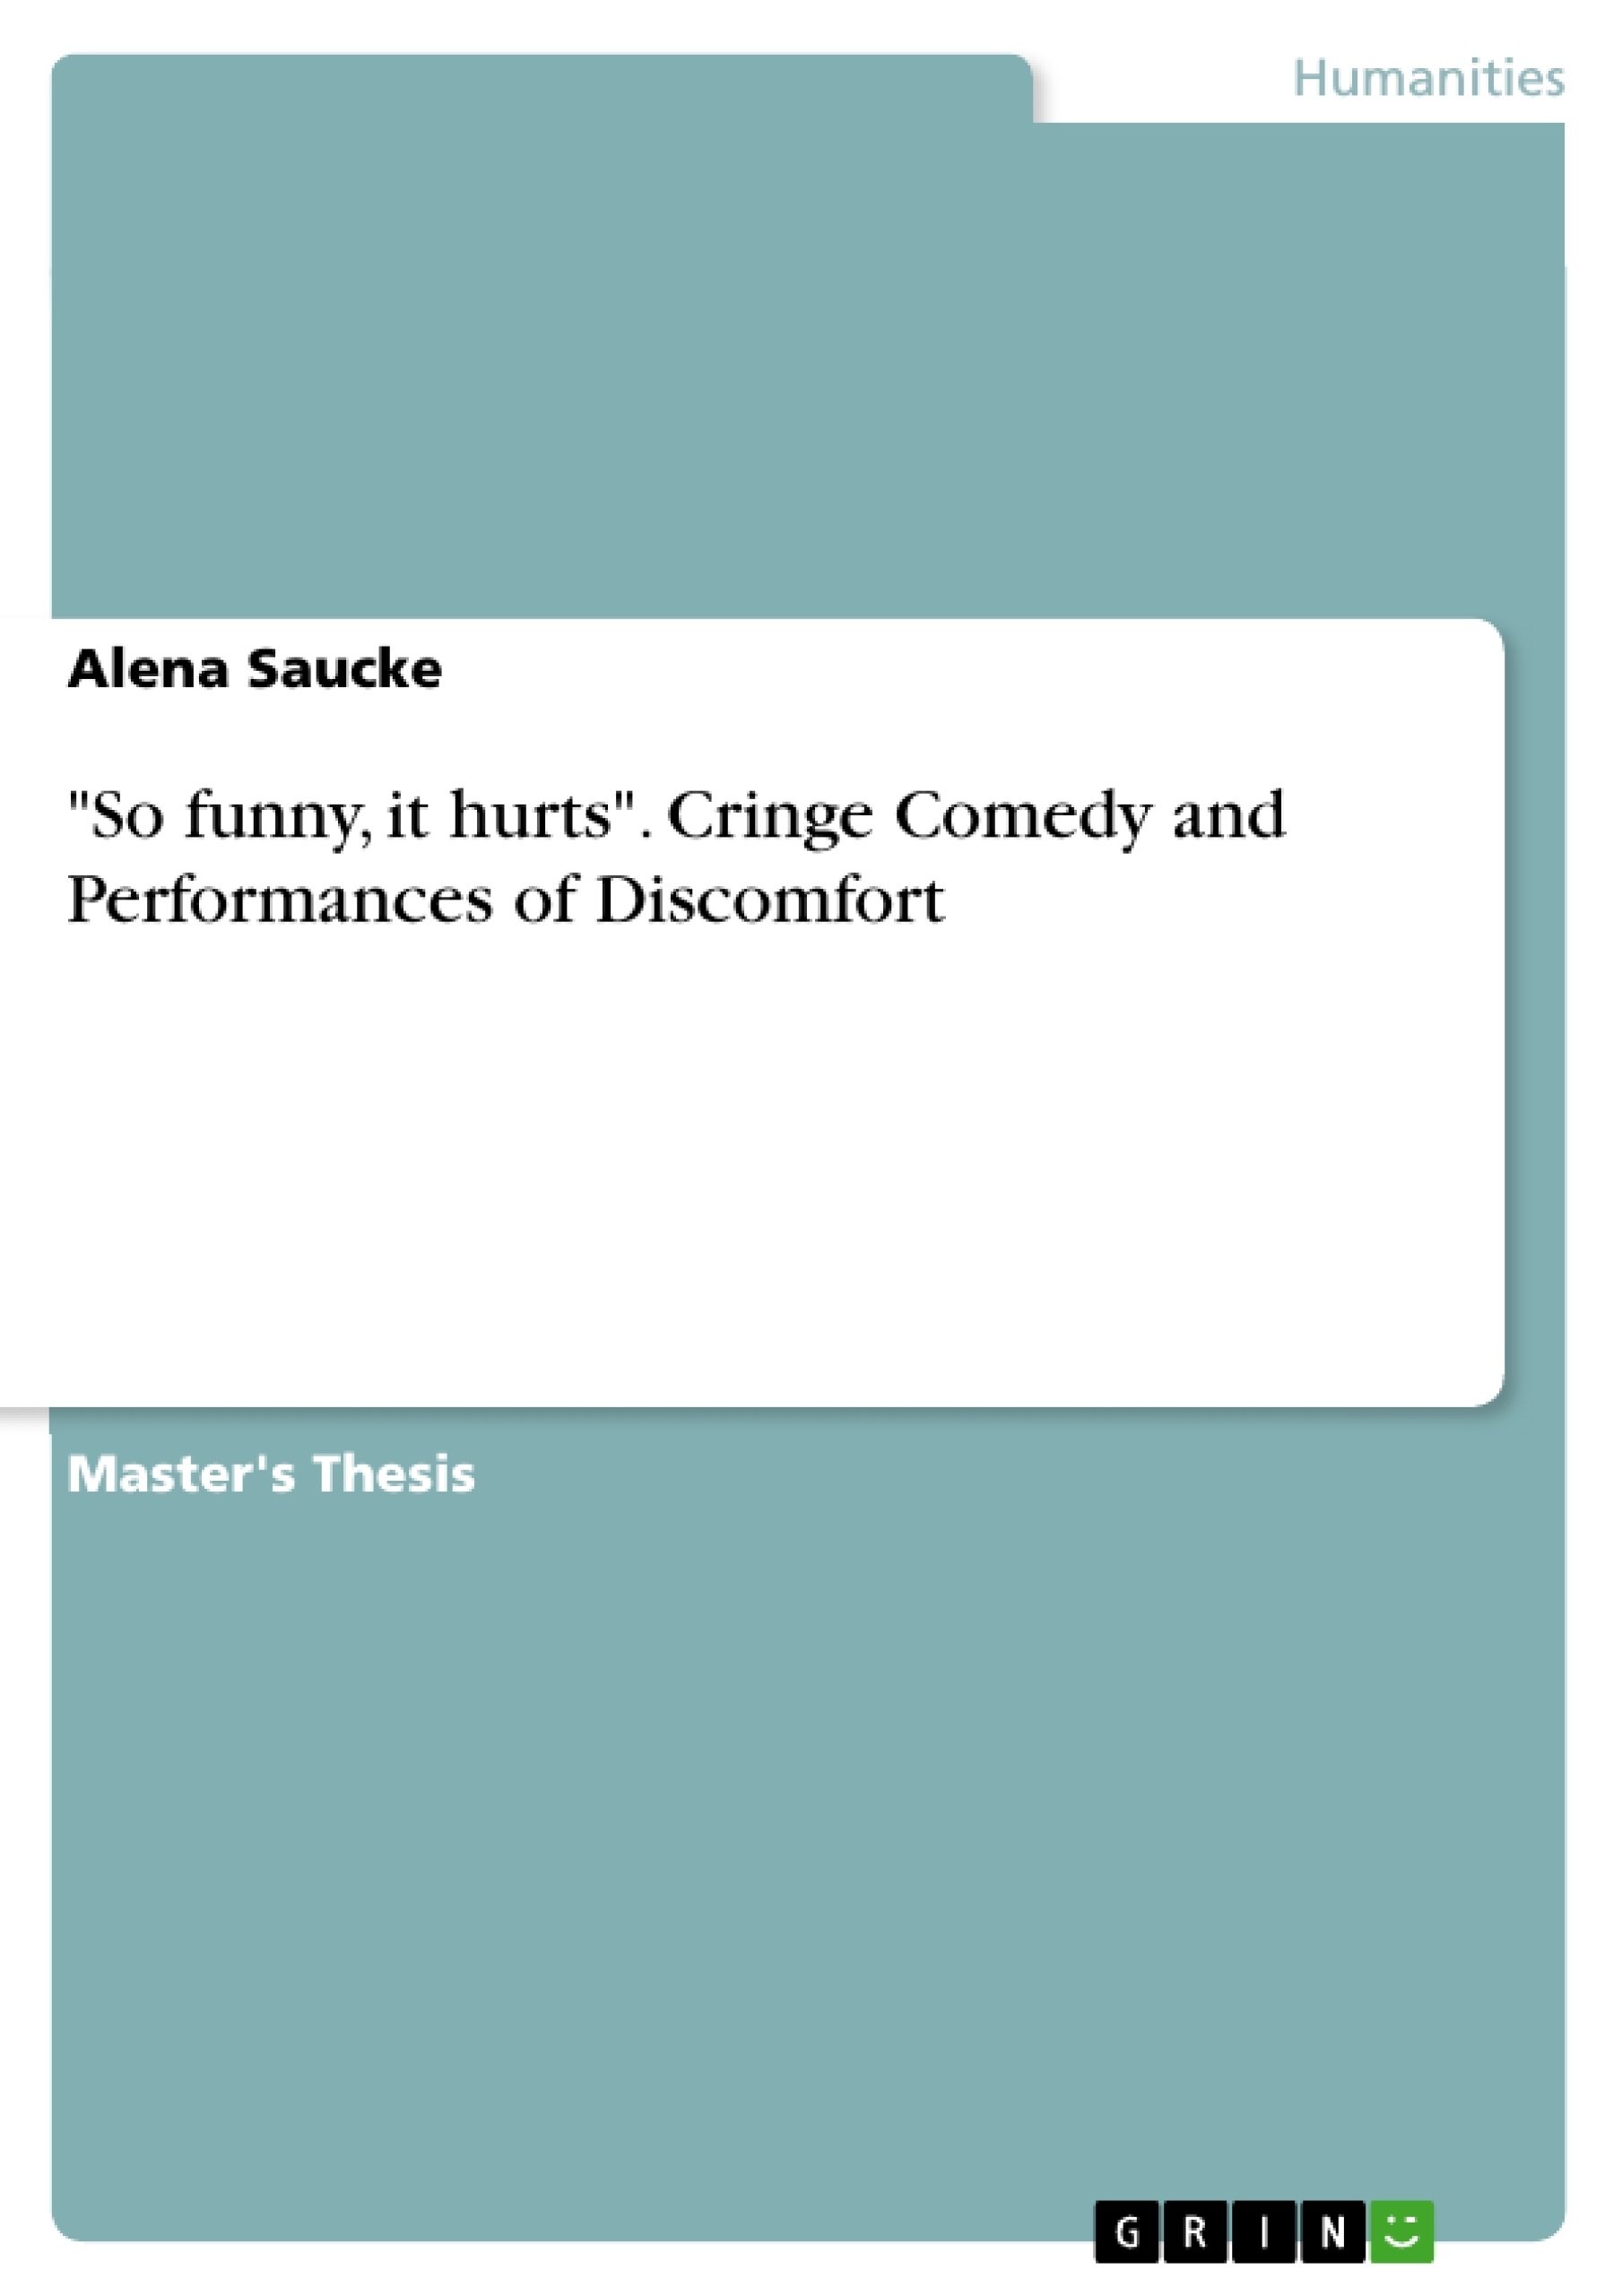 Titre: "So funny, it hurts". Cringe Comedy and Performances of Discomfort